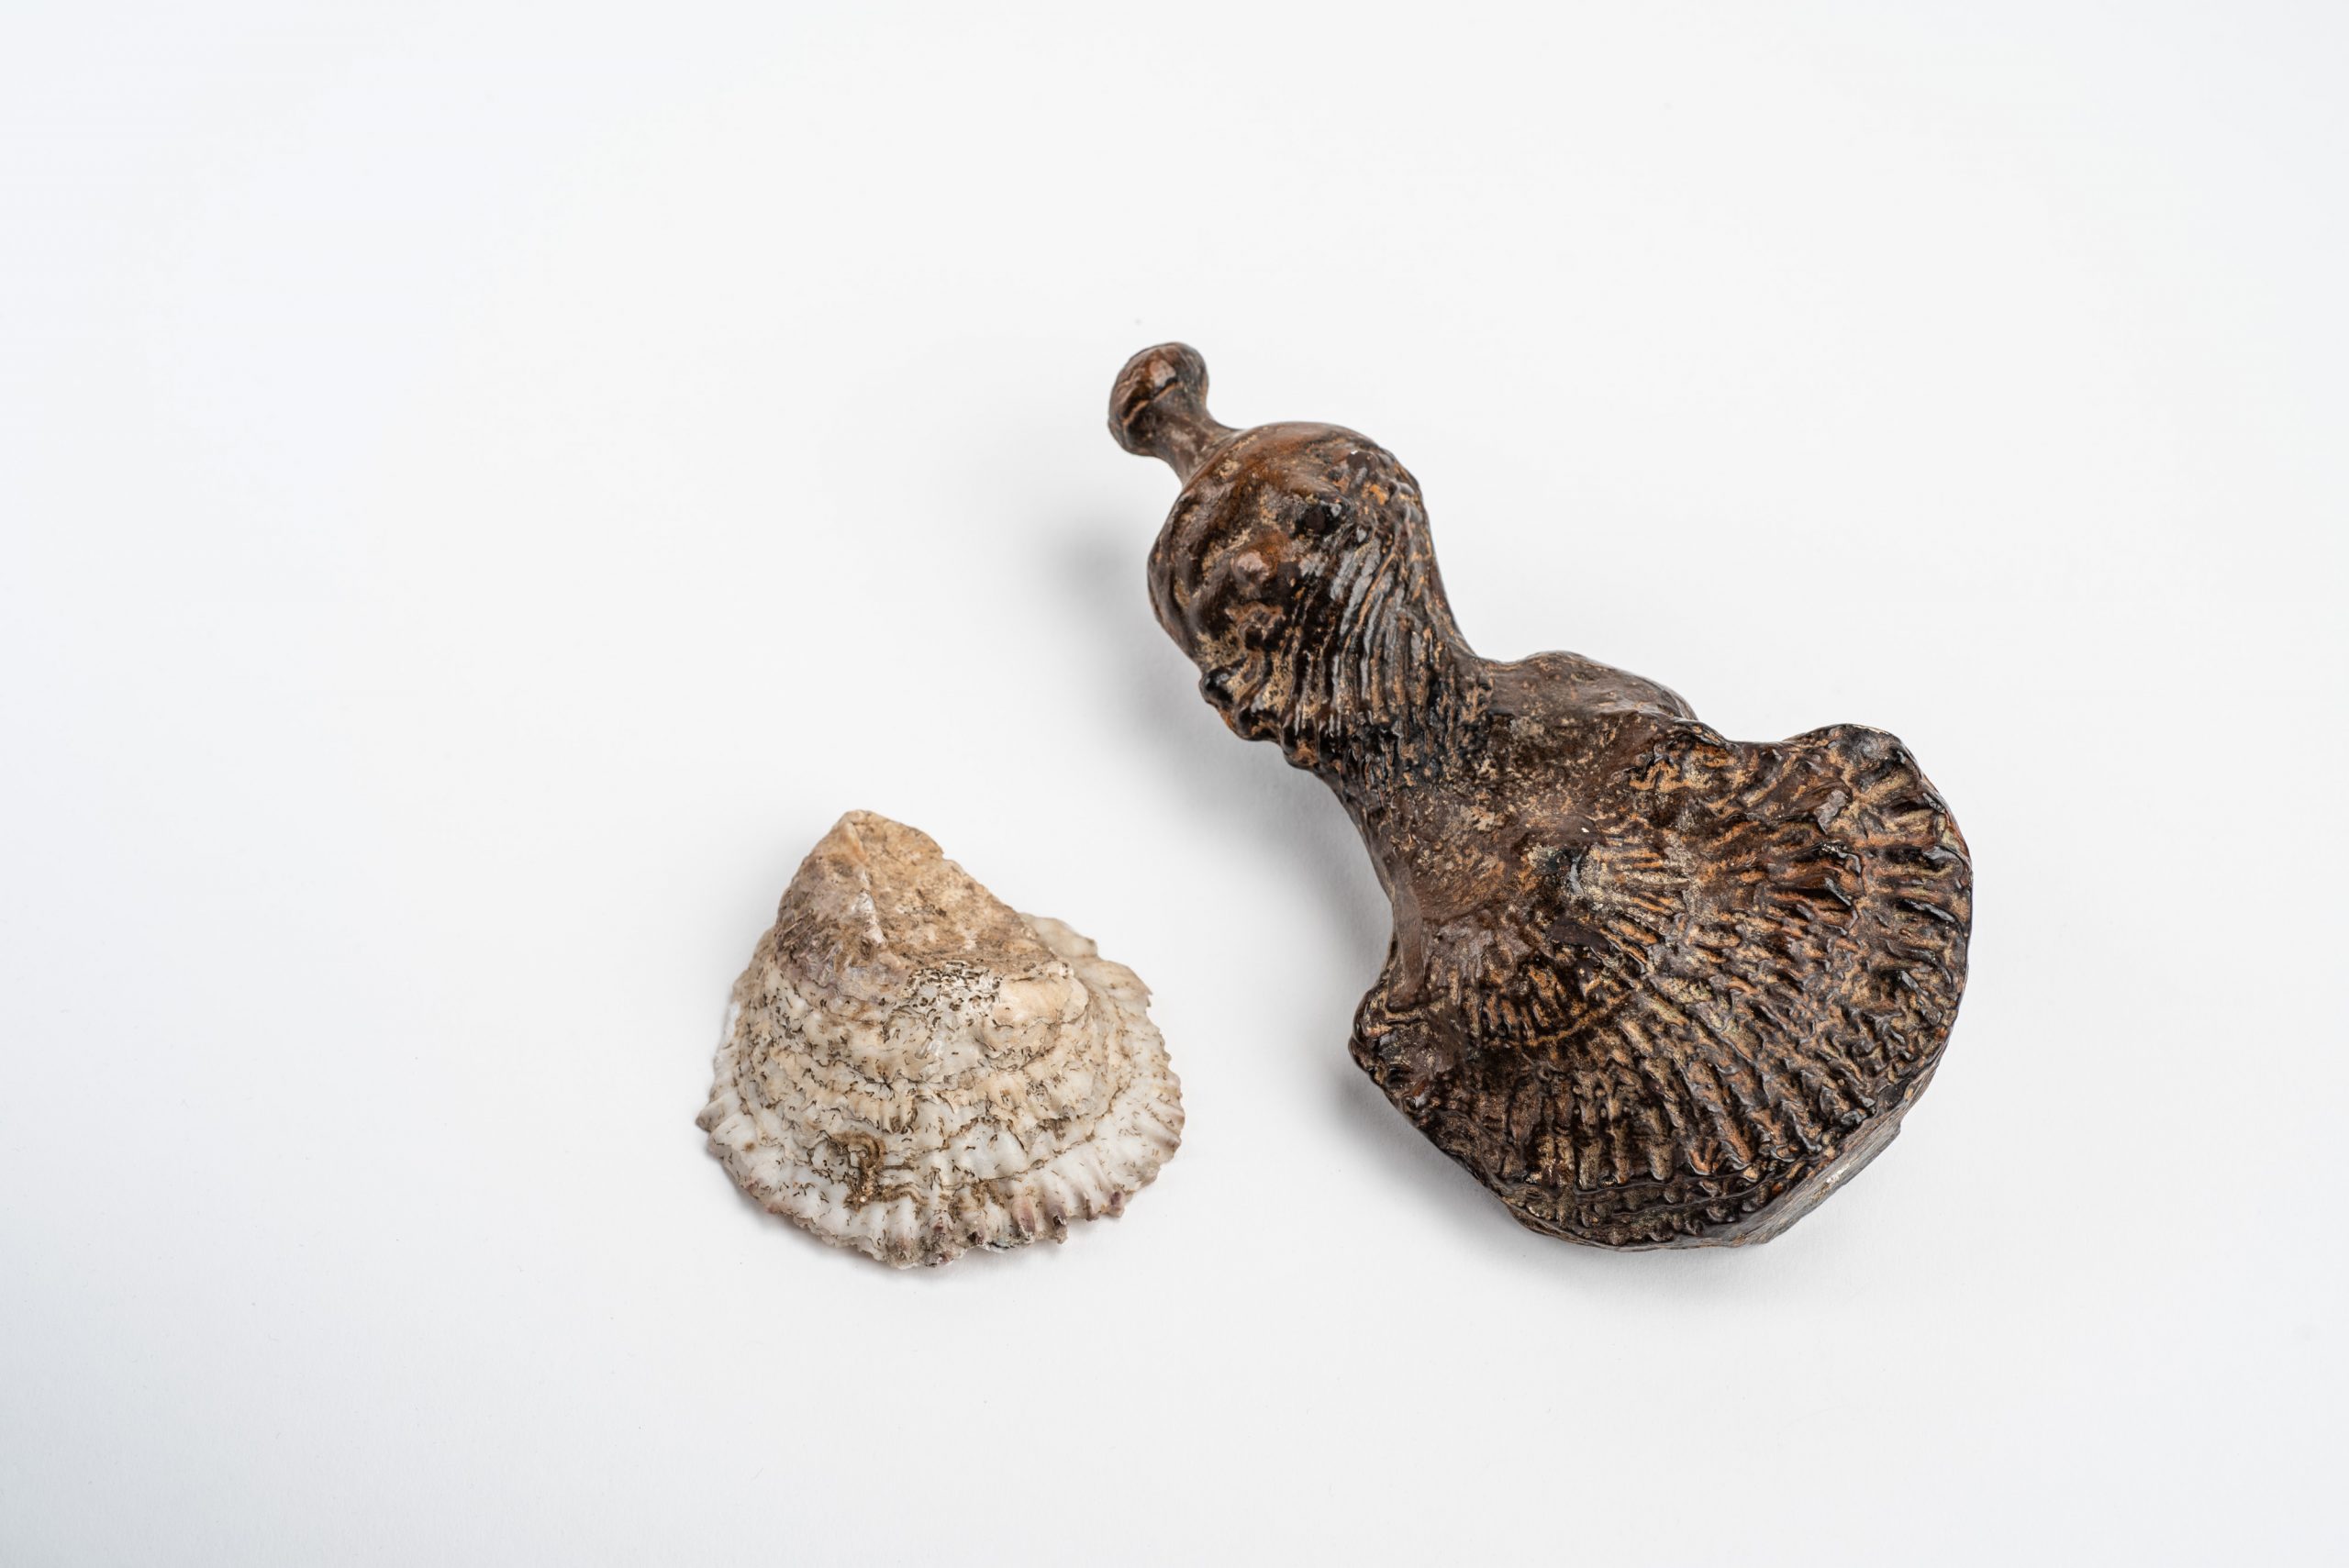 Henry Moore's <em>Standing figure</em>, woman in skirt, cast made from oyster shell, next to <em>Ostrea edulis</em>, commonly known as the European flat oyster. Found in British waters.